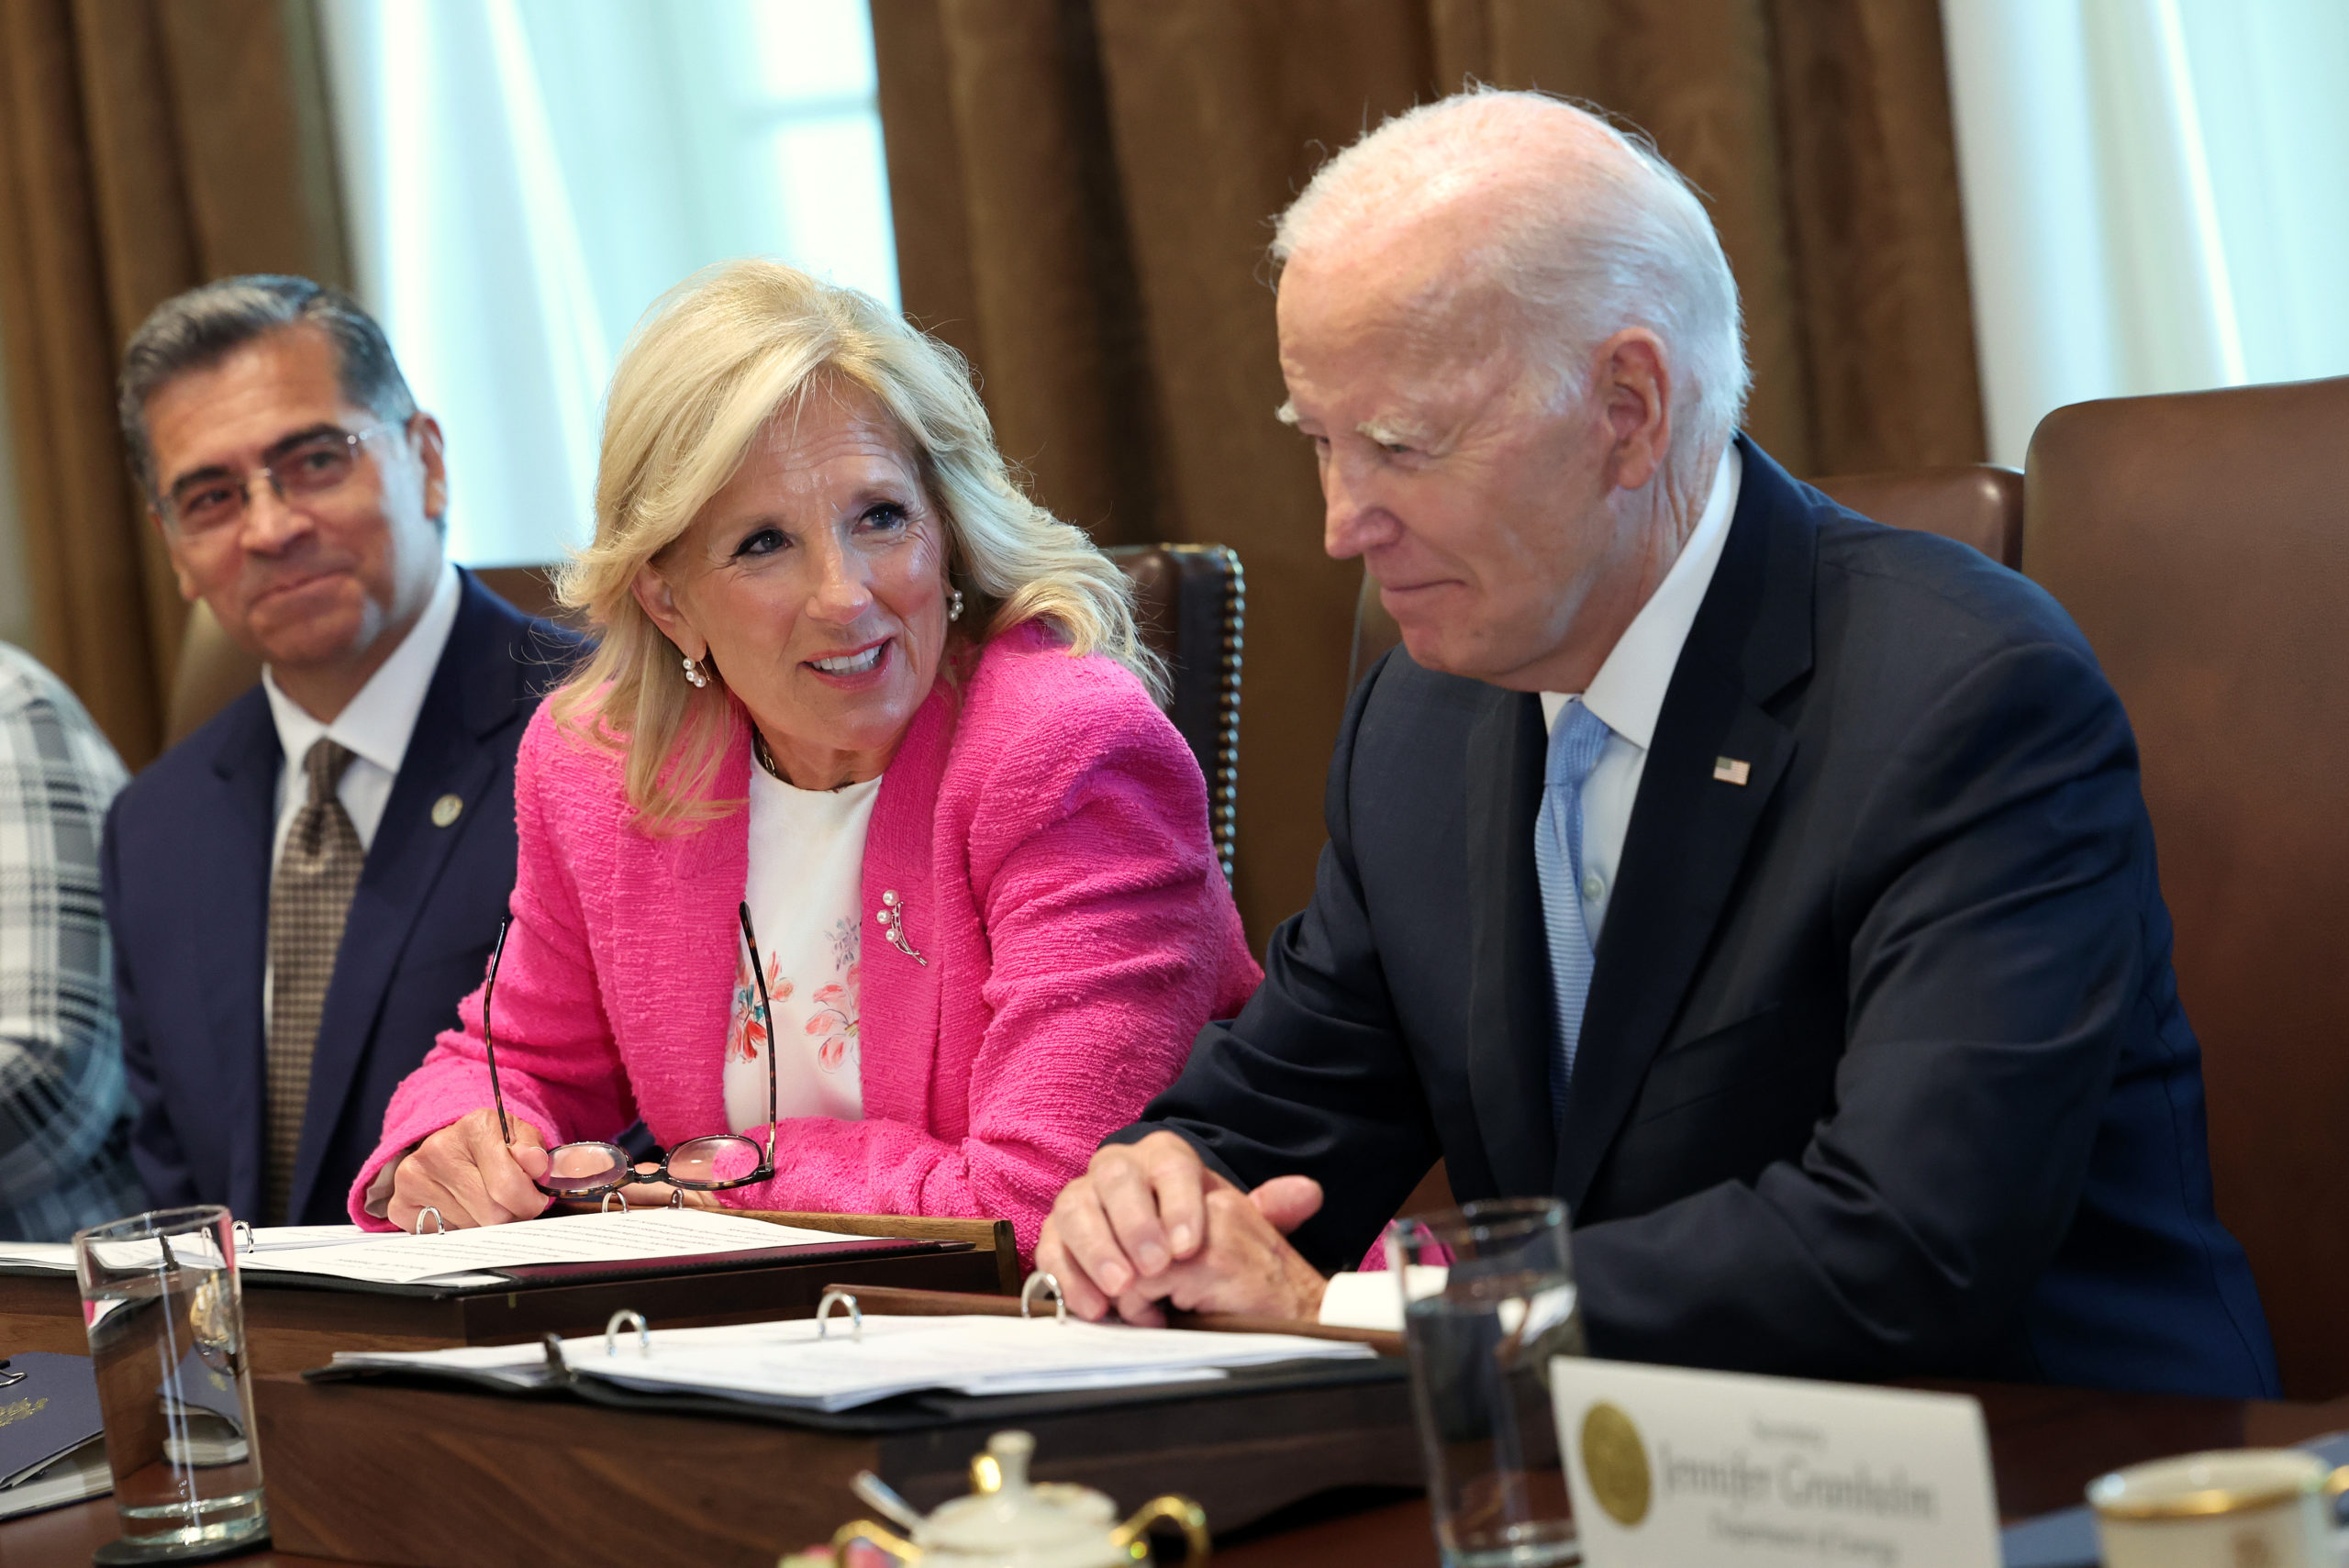 U.S. first lady Jill Biden speaks alongside President Joe Biden and Health and Human Services Secretary Xavier Becerra during a meeting of his Cancer Cabinet at the White House on September 13, 2023 in Washington, DC. Biden spoke on new actions the federal government and non-governmental organizations are taking to help end cancer. (Photo by Kevin Dietsch/Getty Images)